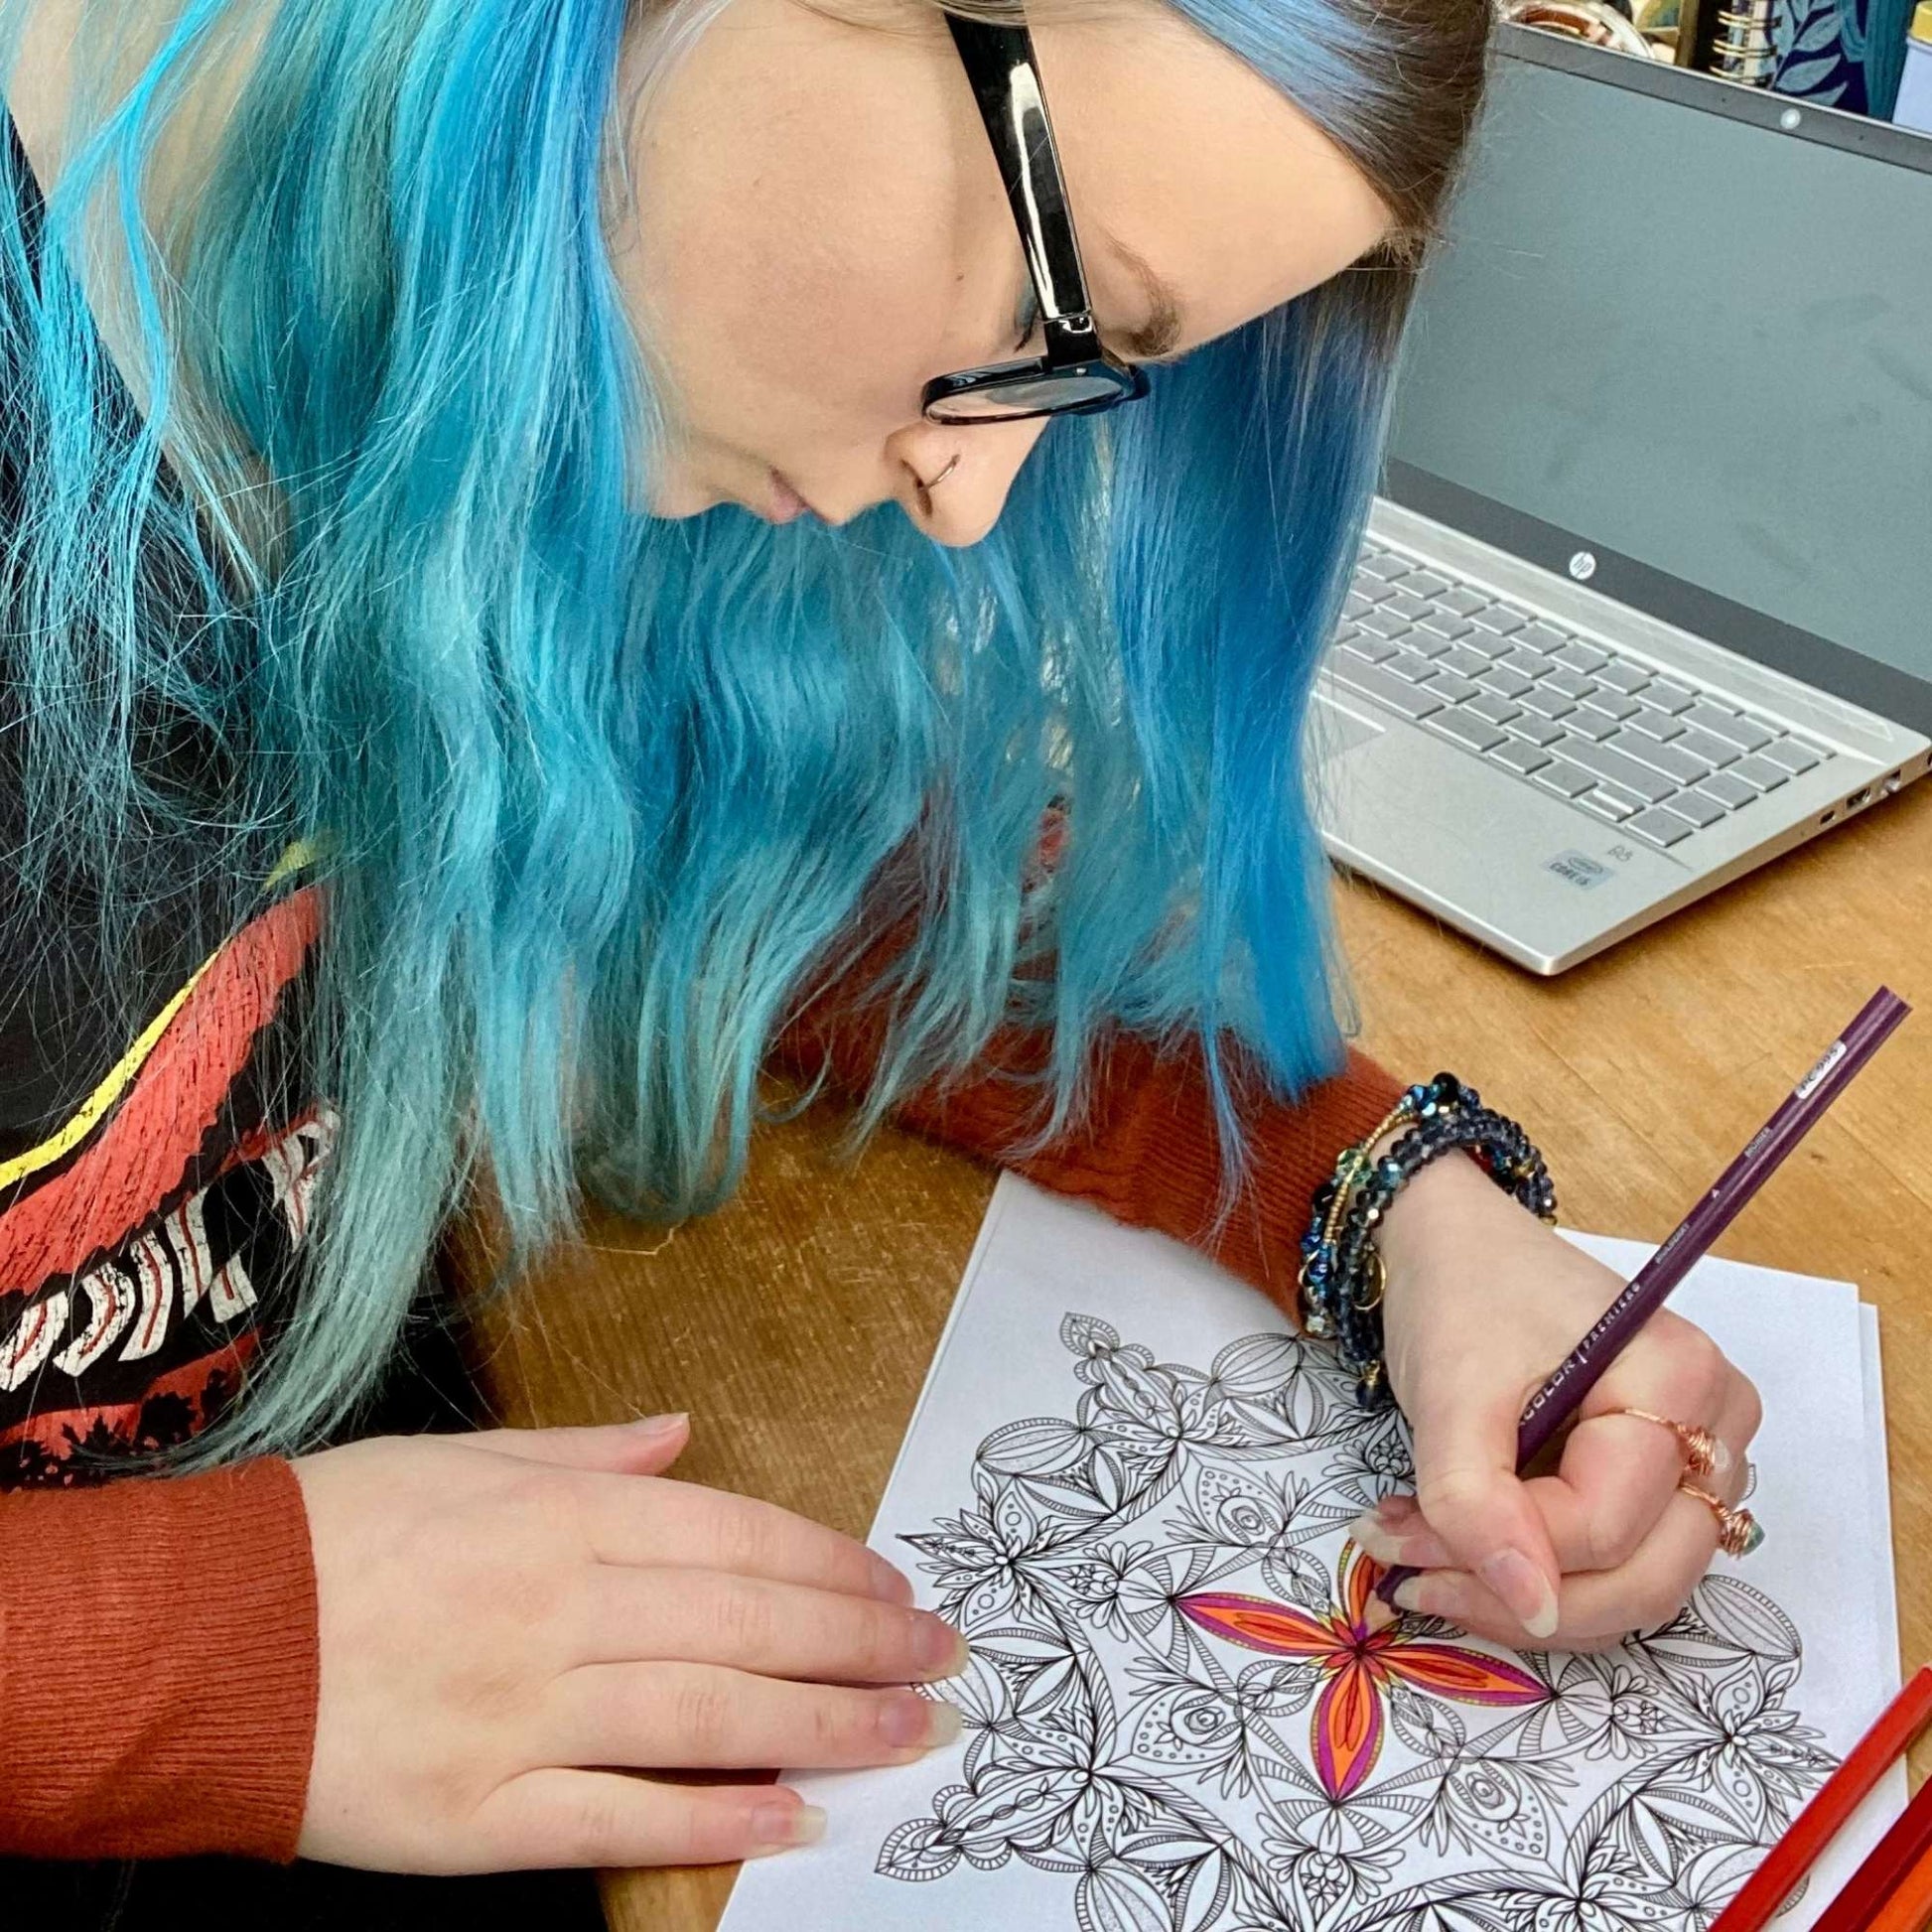 blue haired woman colouring colouring sheet with laptop computer in back groud